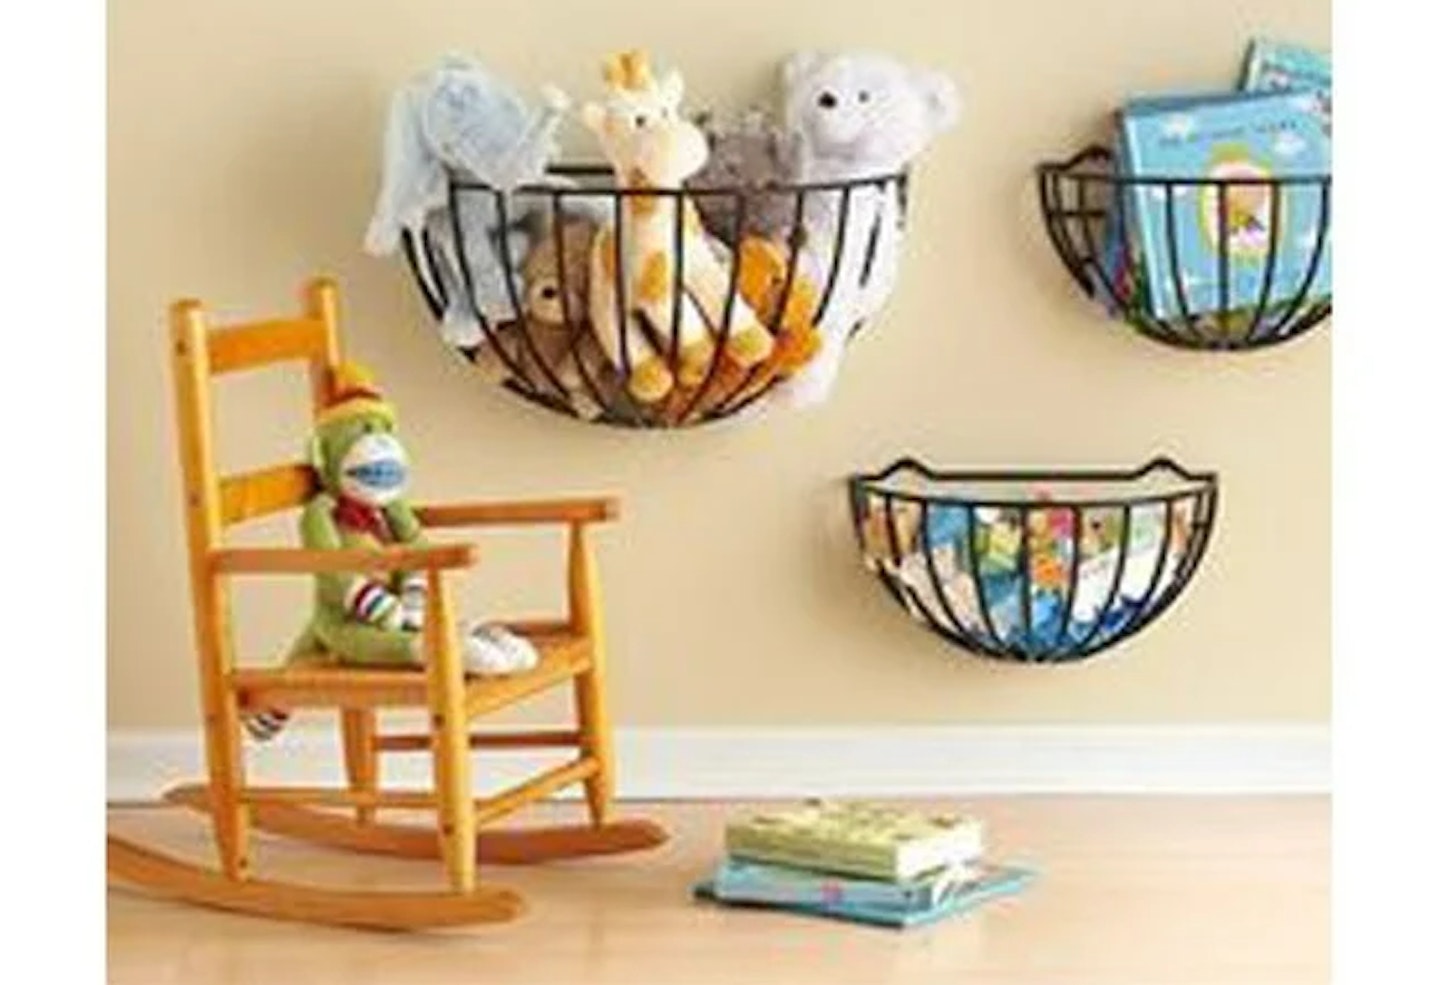 Lots of toys in garden baskets on walls